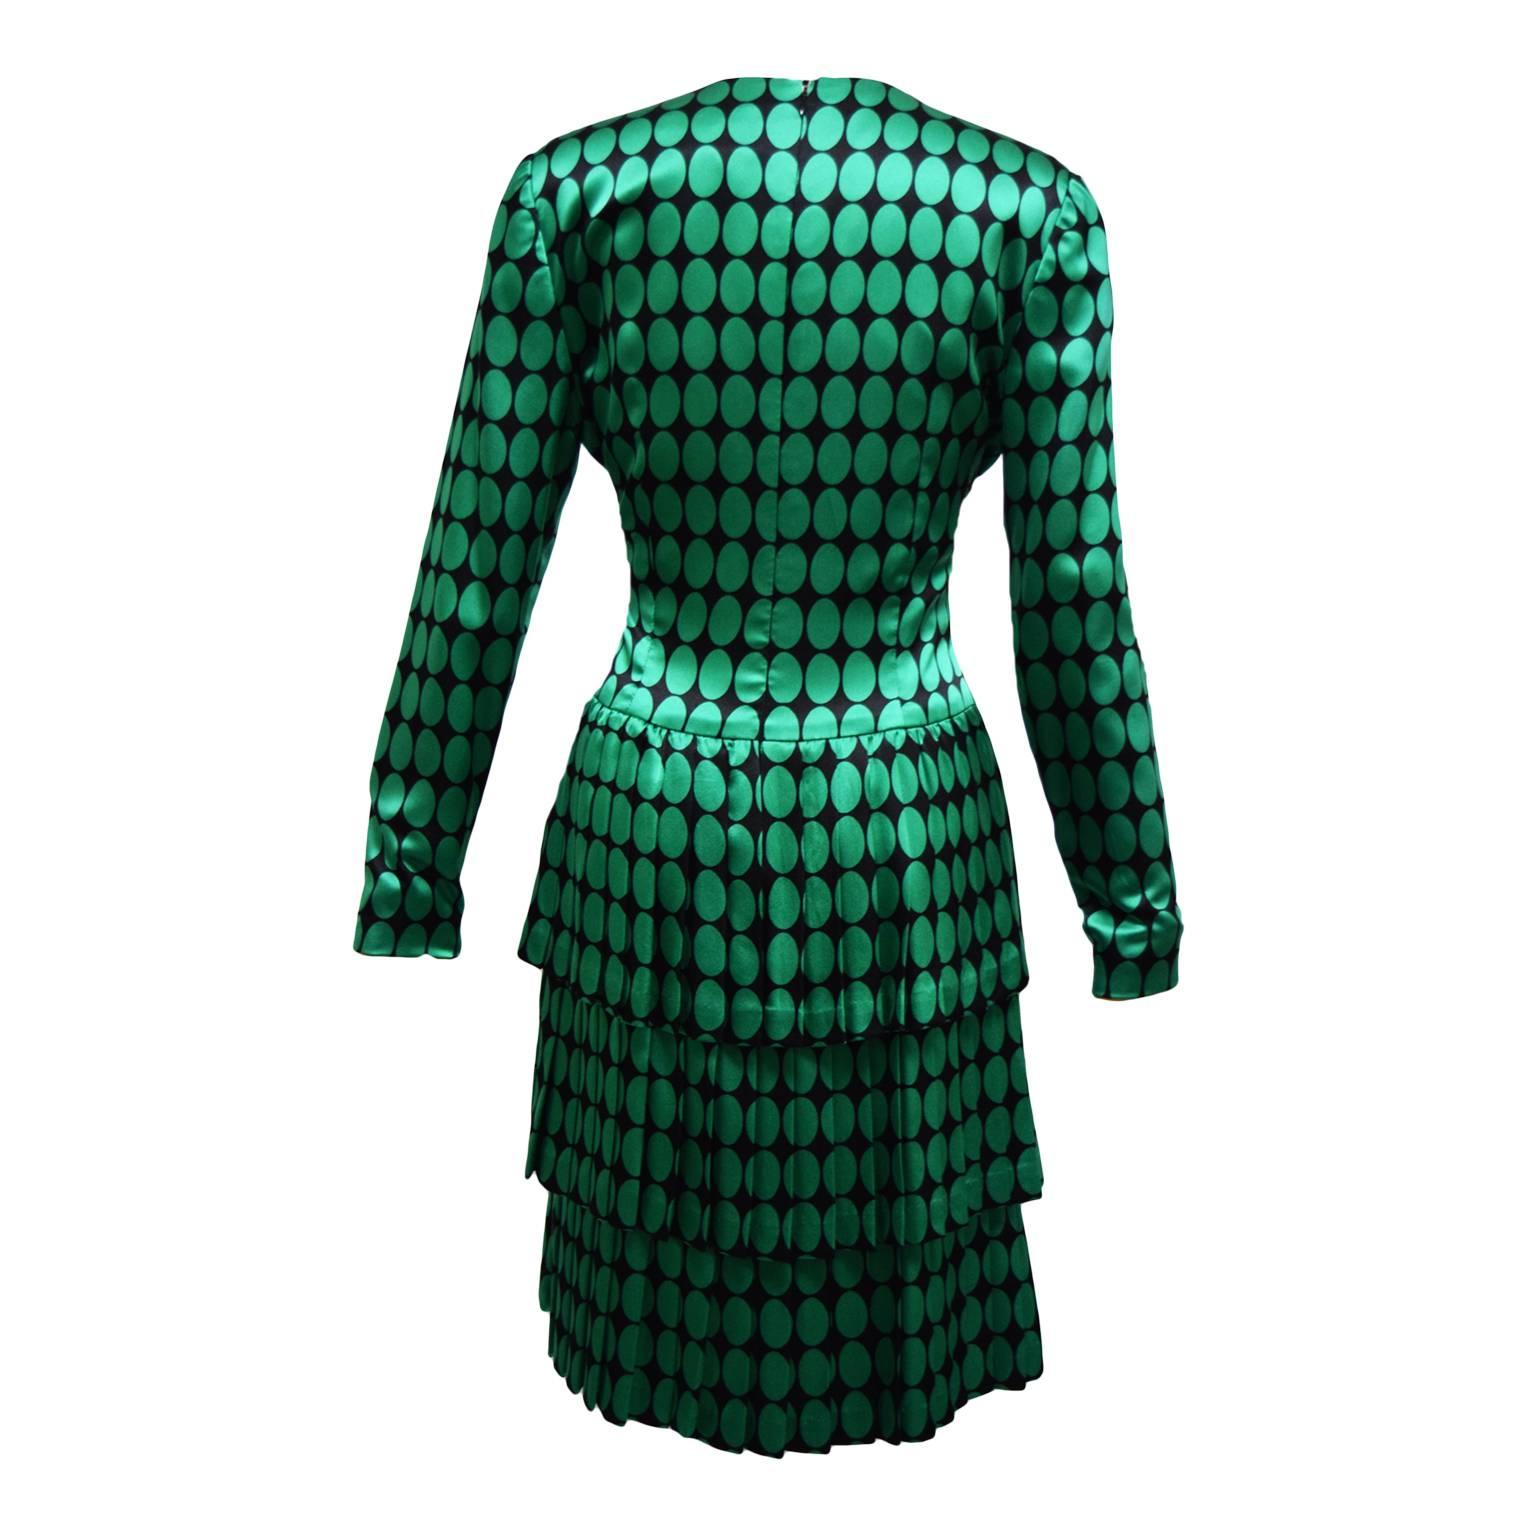 This beautiful Carolina Herrera  vintage sheath dress is black and green polka dot printed silk, and is long sleeved. The back is knife pleated giving it a cool layered old fashioned bustled illusion. 